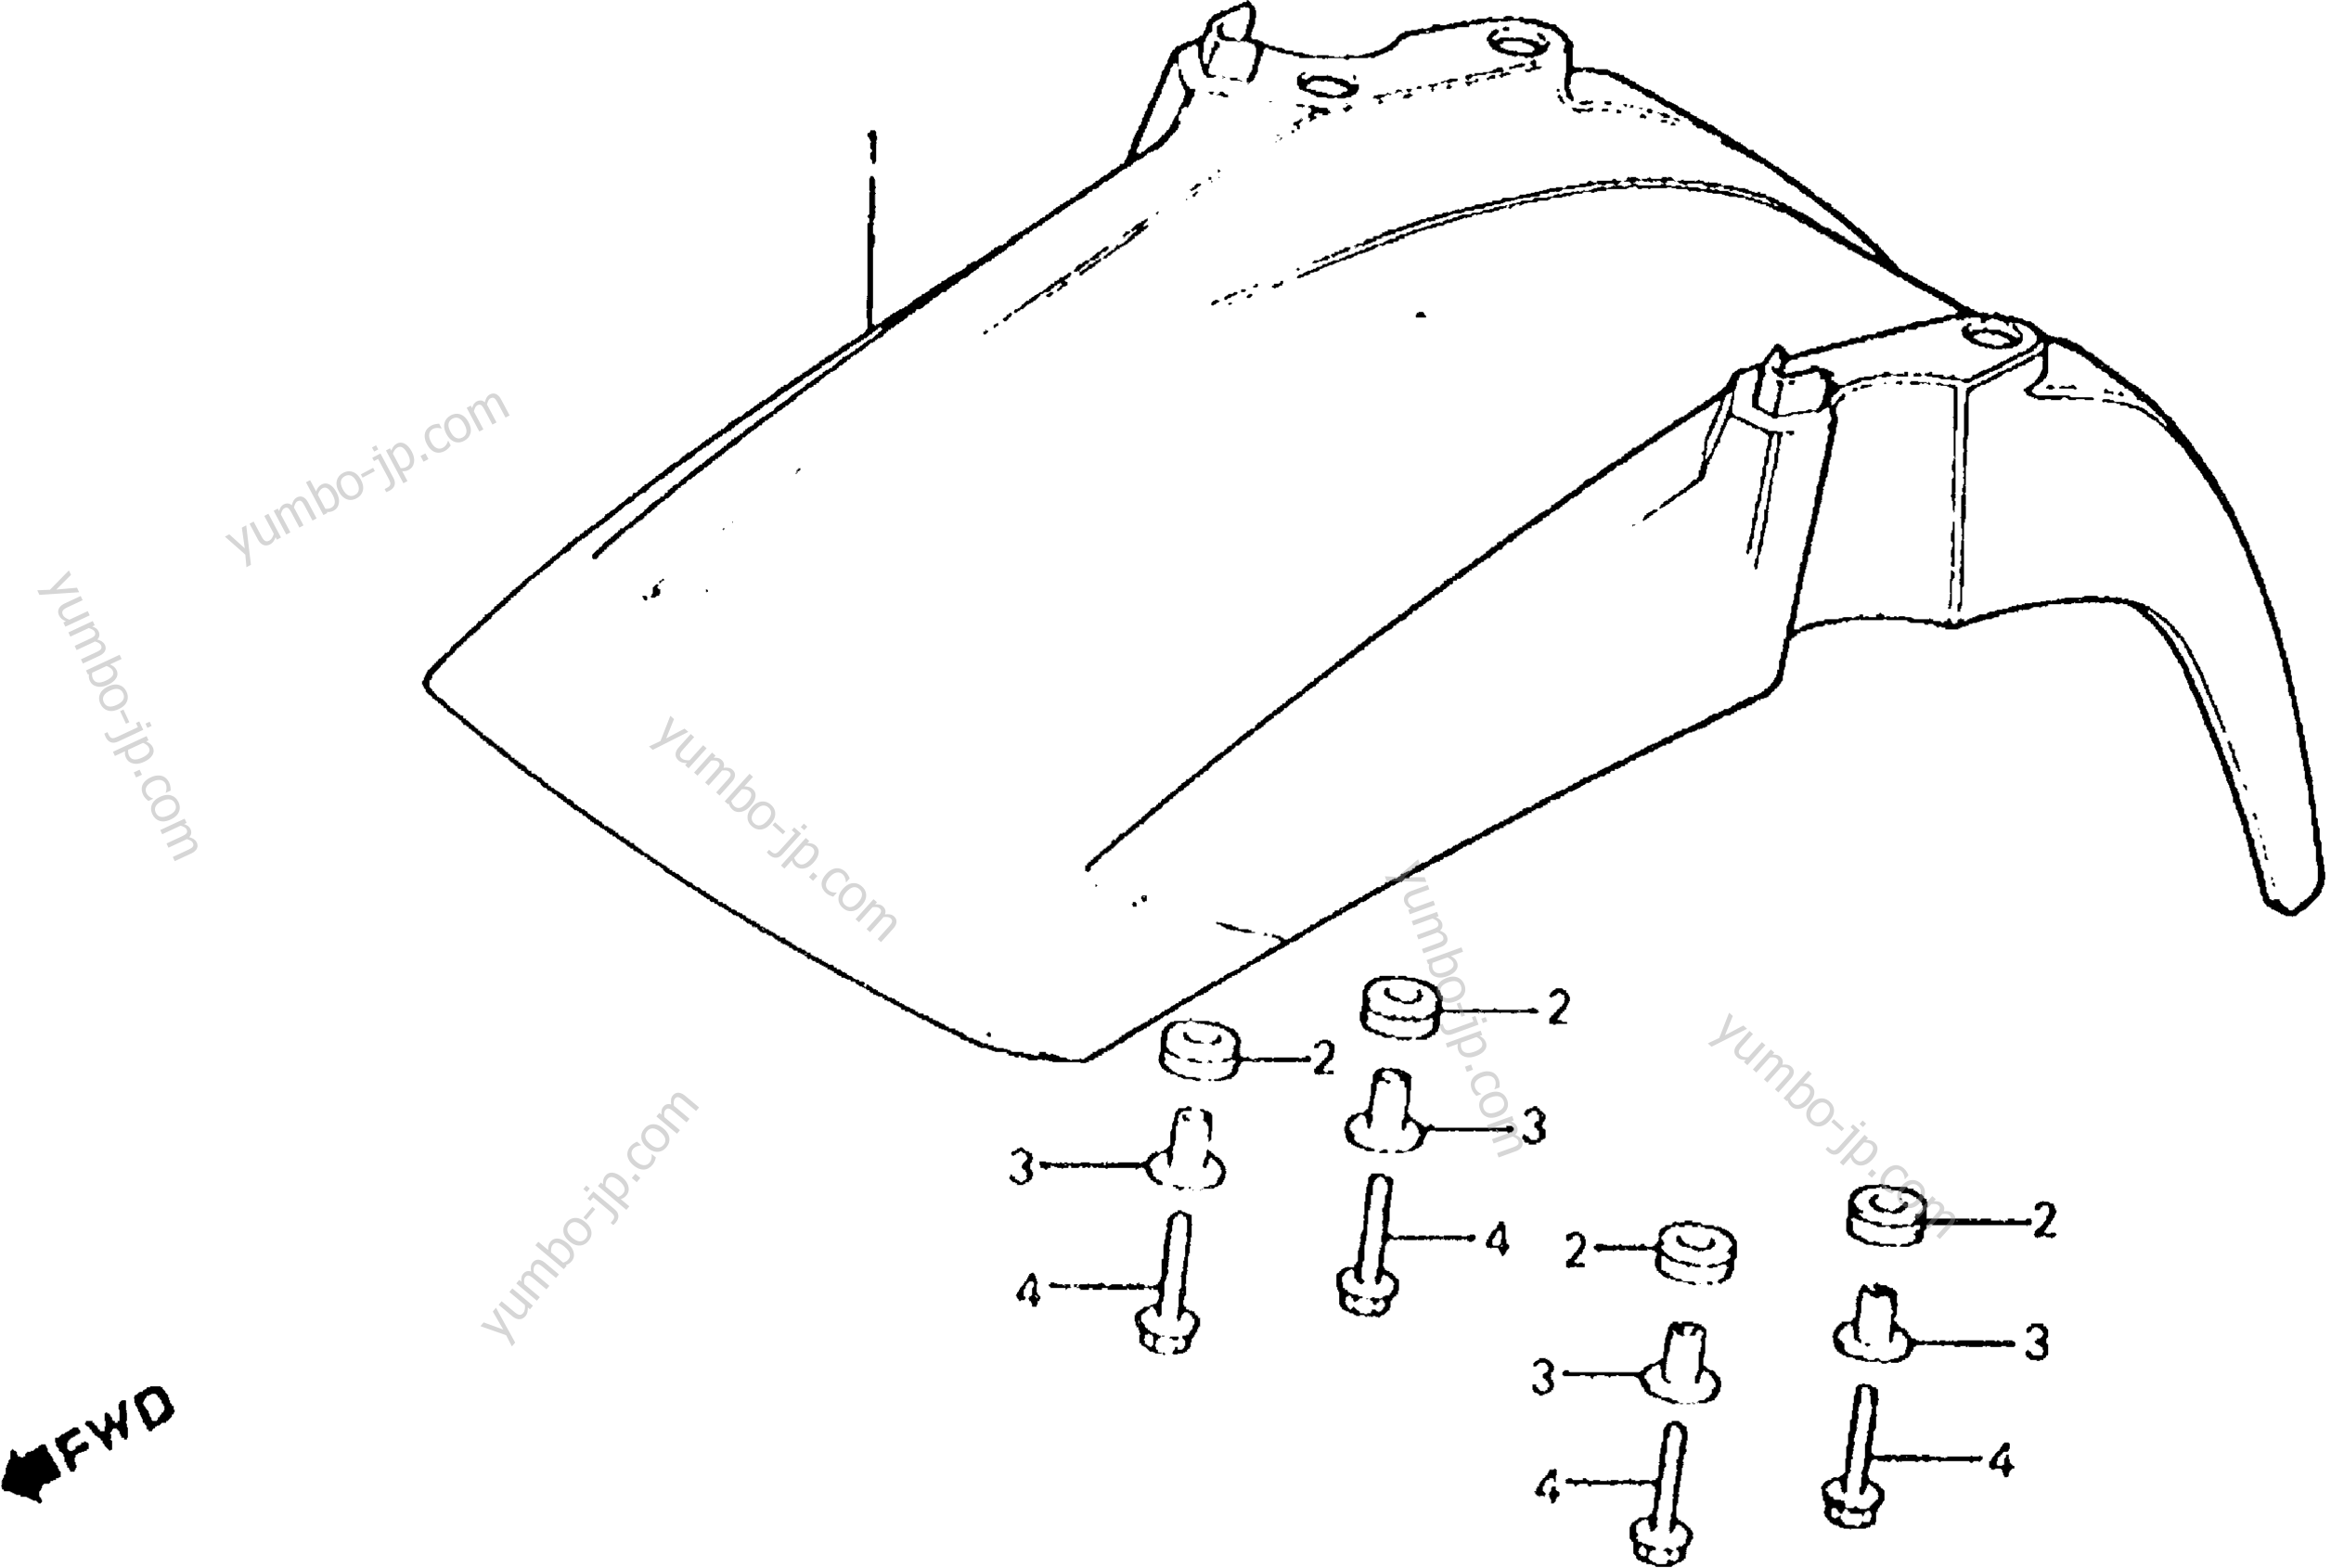 FRONT FENDER for ATVs HONDA ATC250R A 1981 year